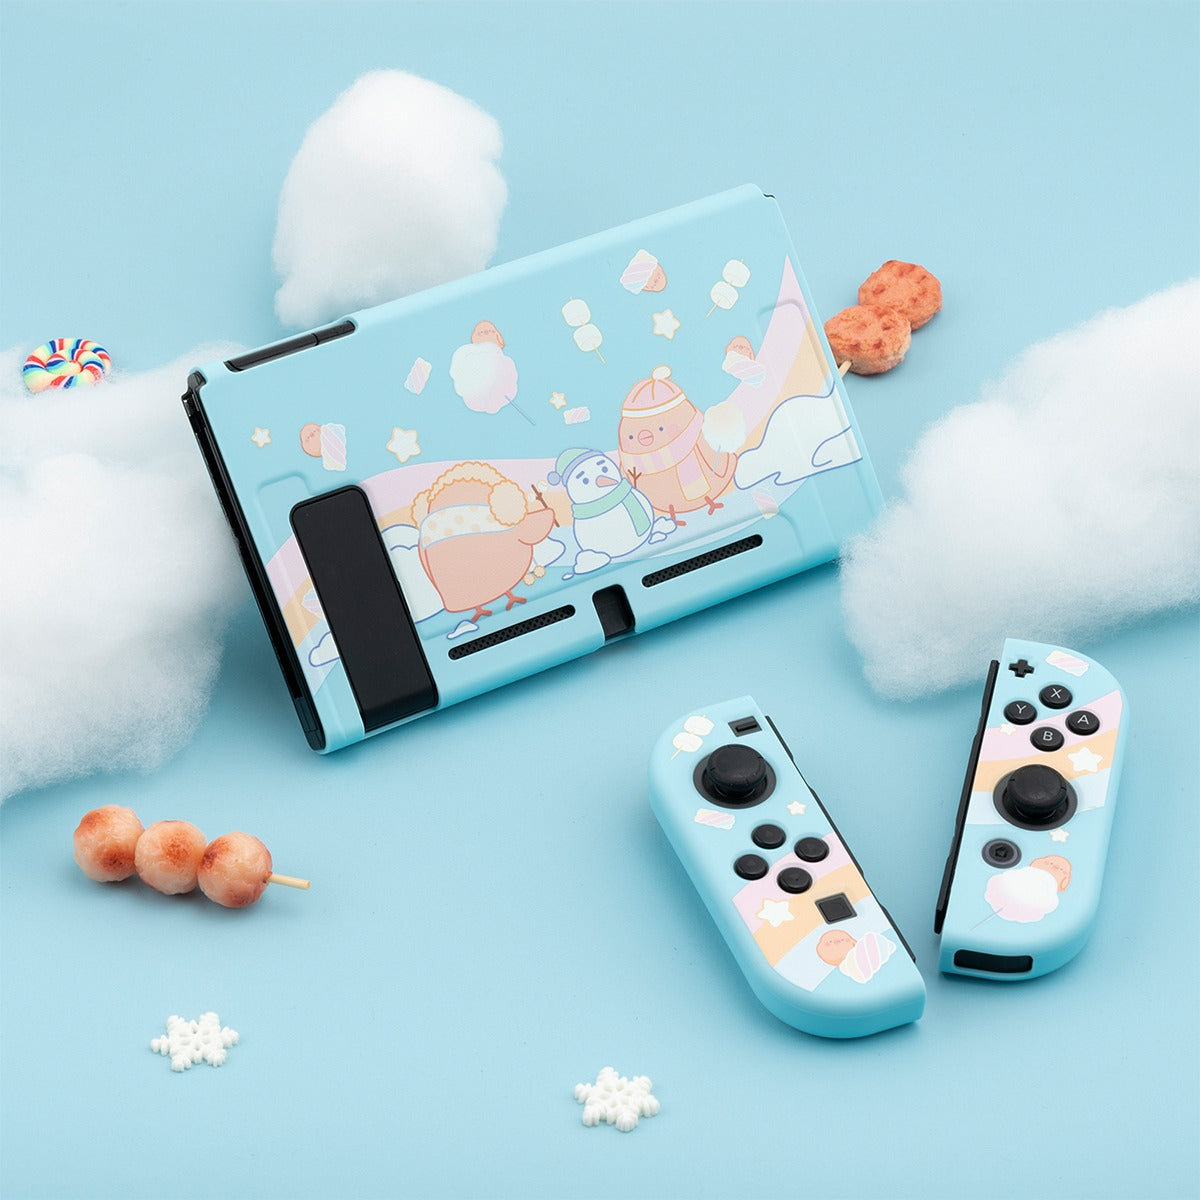 Chicken Snowman Blue Pastel colors__Nintendo Switch Protection Casing Cover